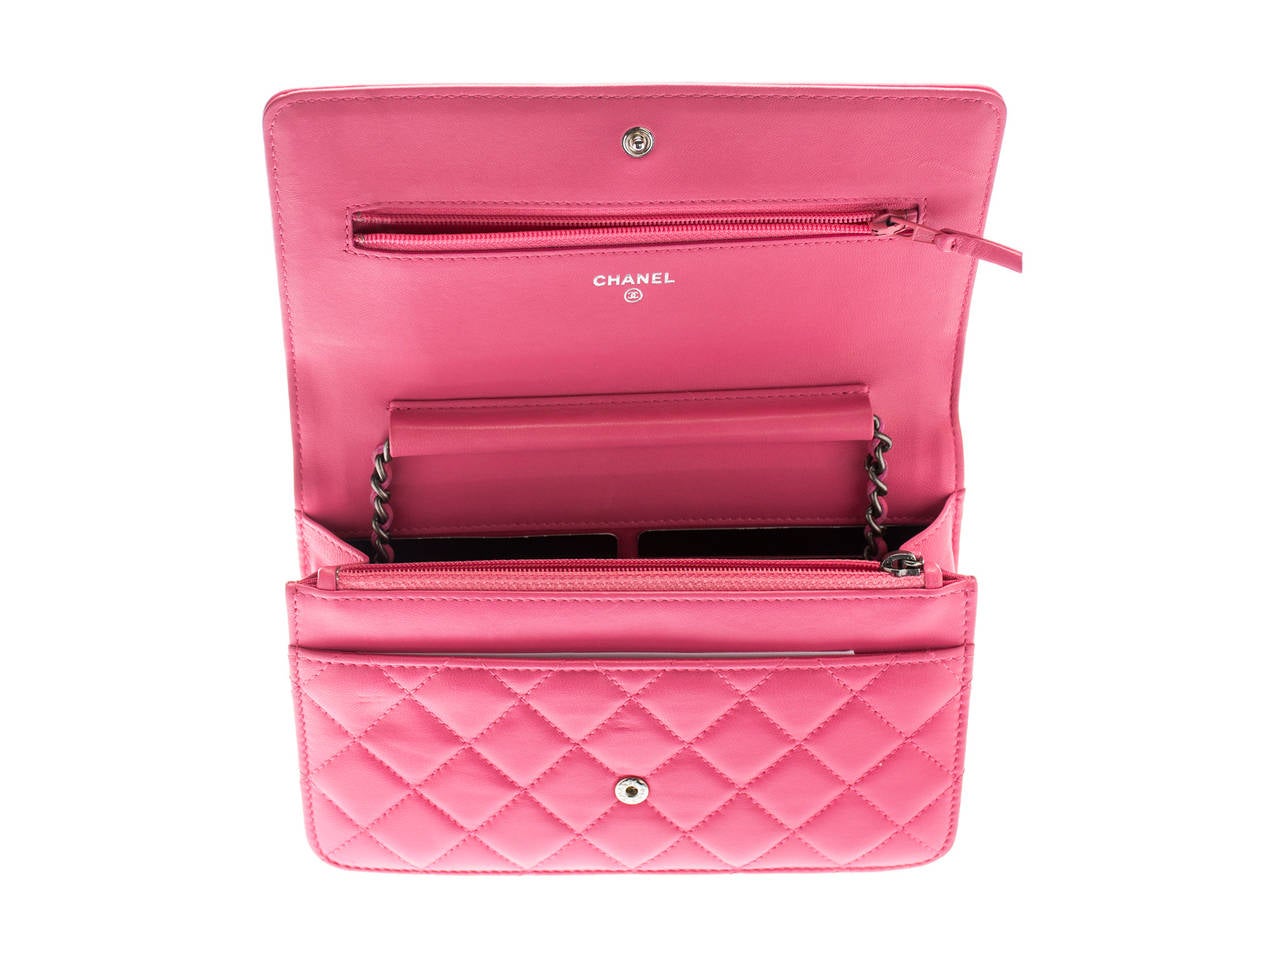 Extremely sought after and impossible to find is the Chanel WOC (Wallet on Chain) pink boy bag! This bag is featured in lambskin leather with rhodium hardware. One interior zip pocket with multiple card slots.